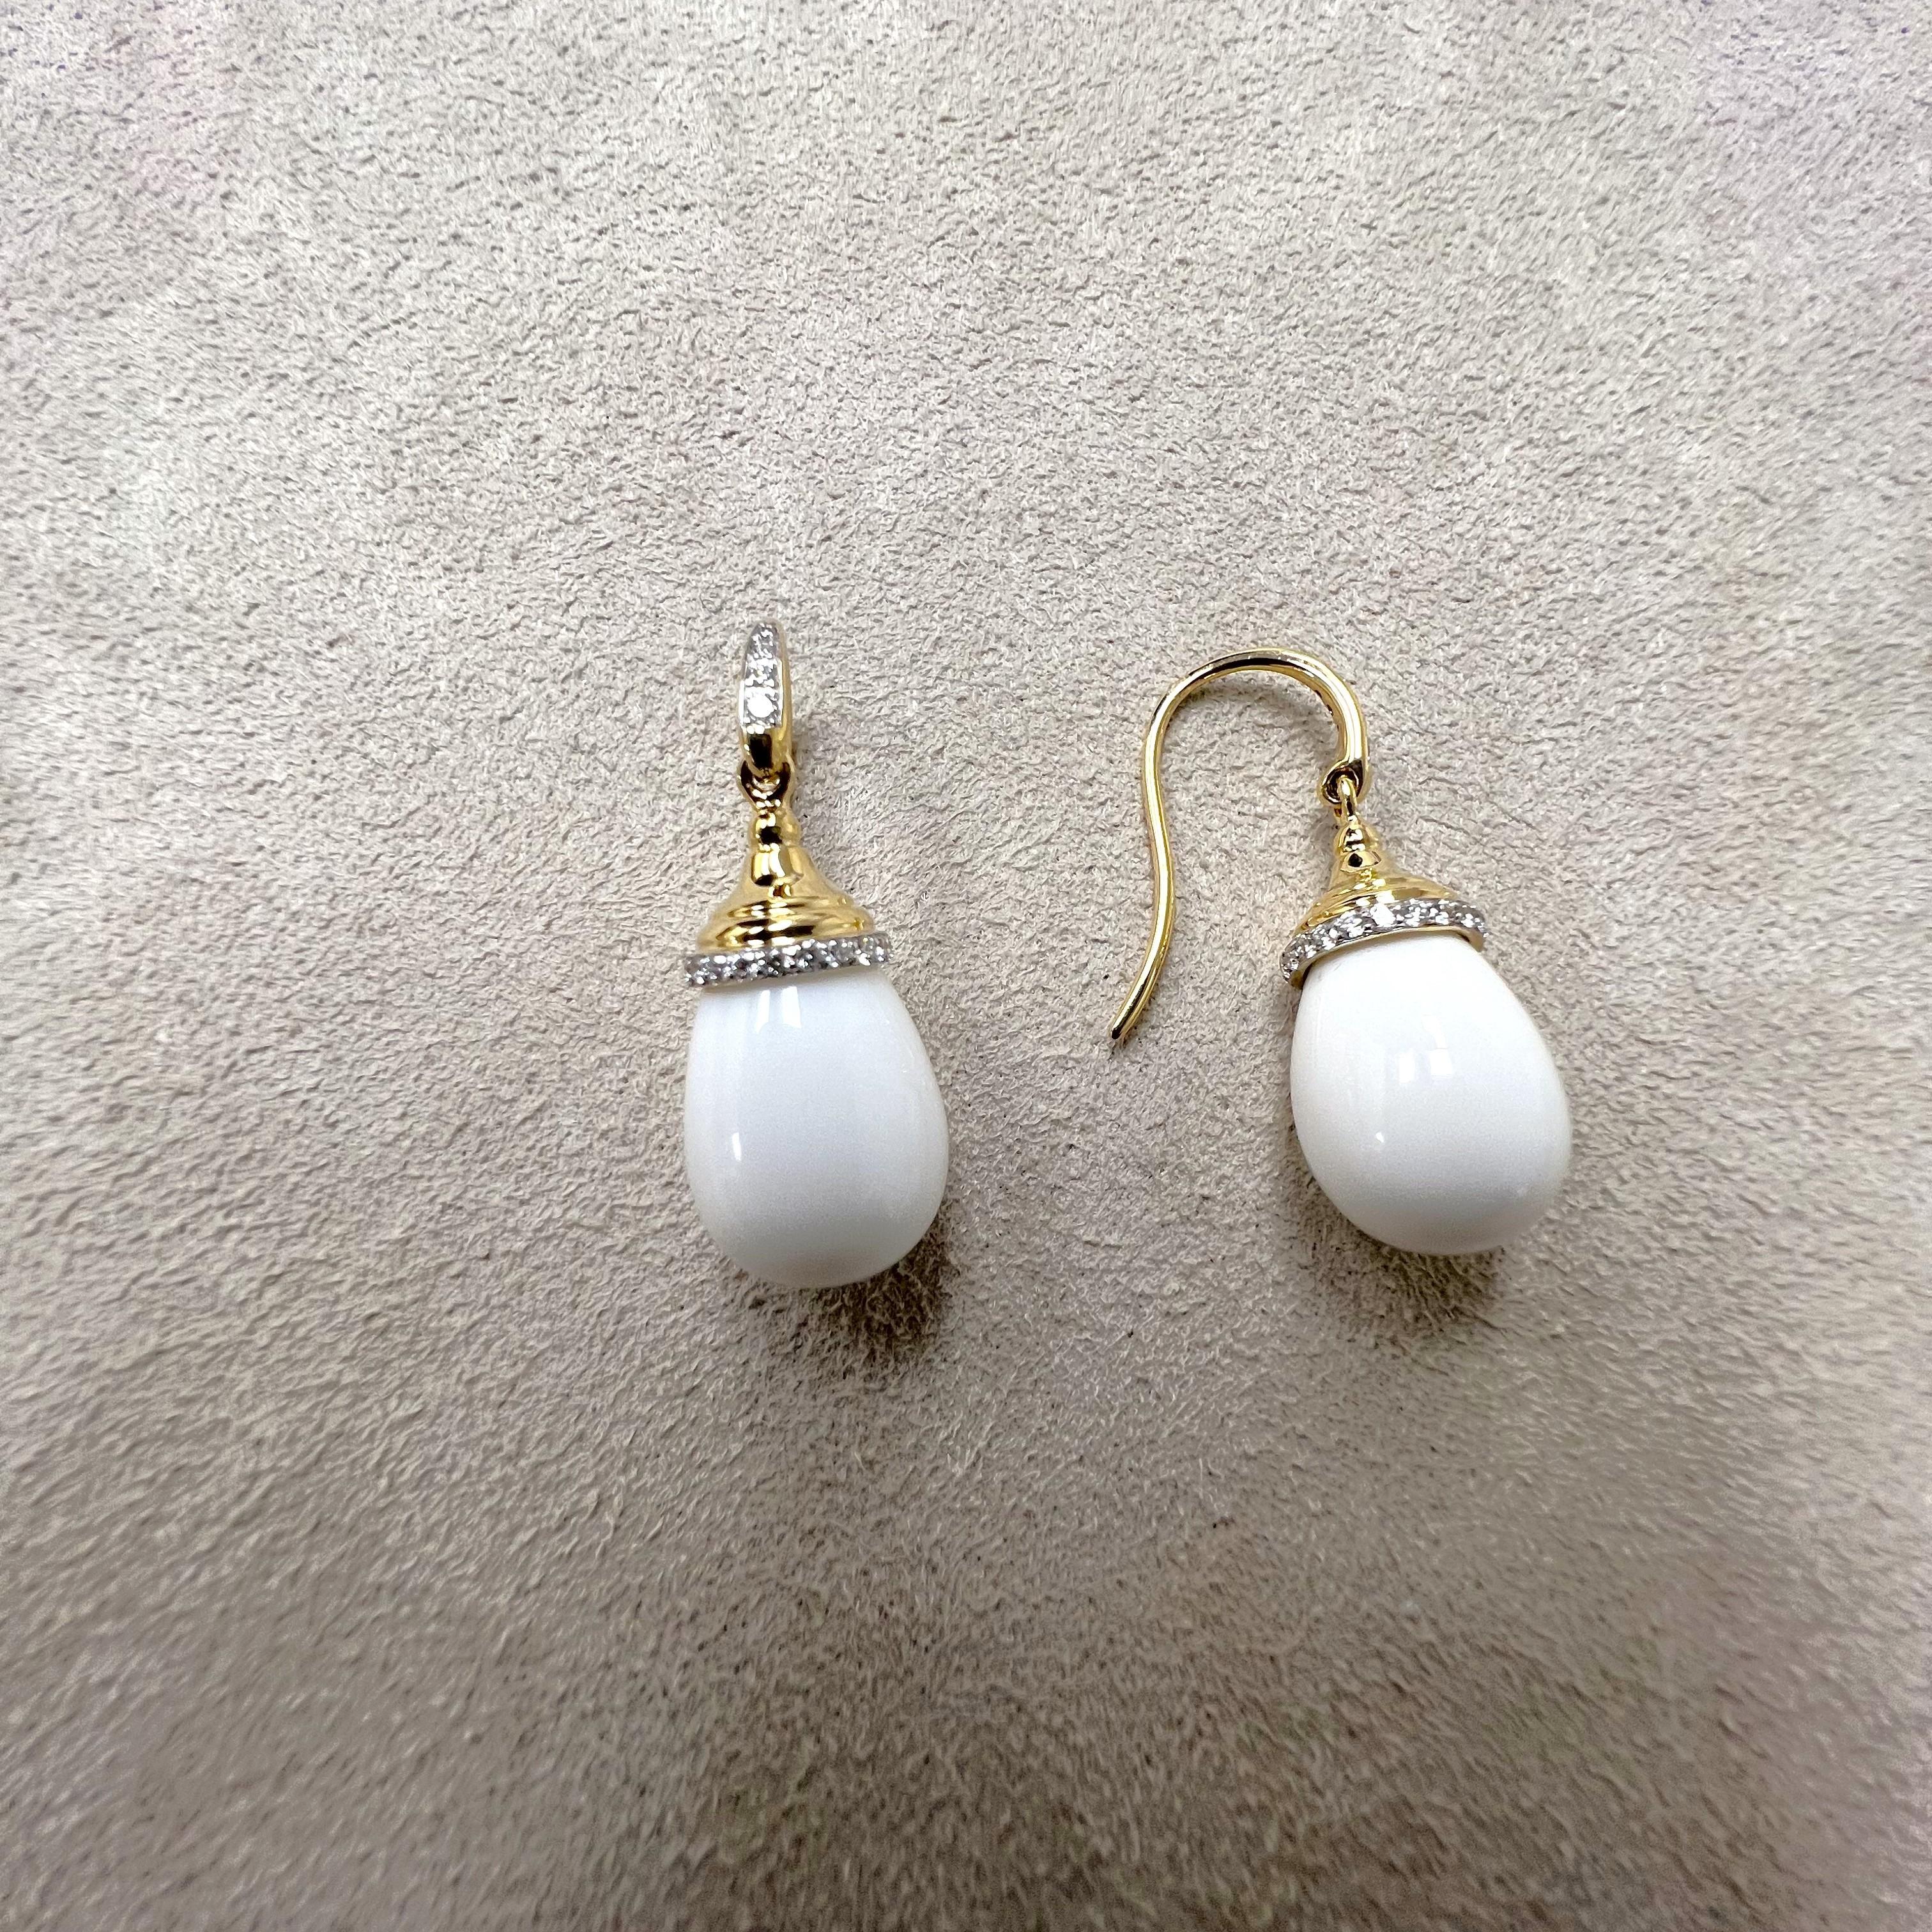 Created in 18 karat yellow gold
Agate drops 20 carats approx.
Bright diamonds 0.20 carat approx.
French wire for pierced ears
Limited edition

About the Designers

Drawing inspiration from little things, Dharmesh & Namrata Kothari have created an